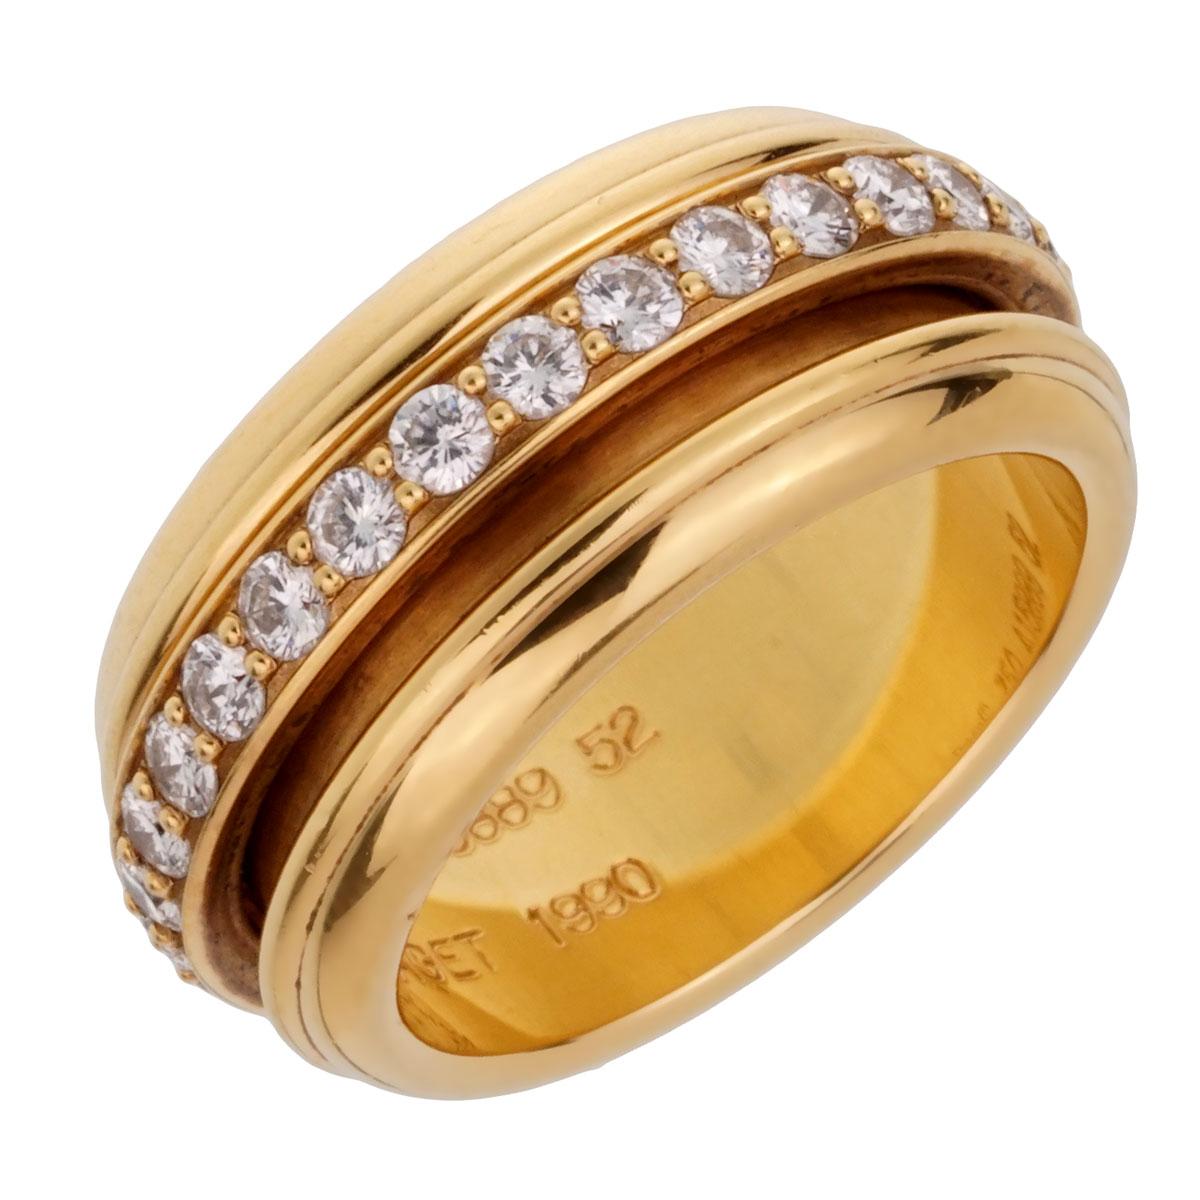 A fabulous vintage Piaget Possession diamond ring set with 1.50ct of the finest Piaget round brilliant cut diamonds in 18k yellow gold. The ring measures a size 6 1/4

Sku: 1906